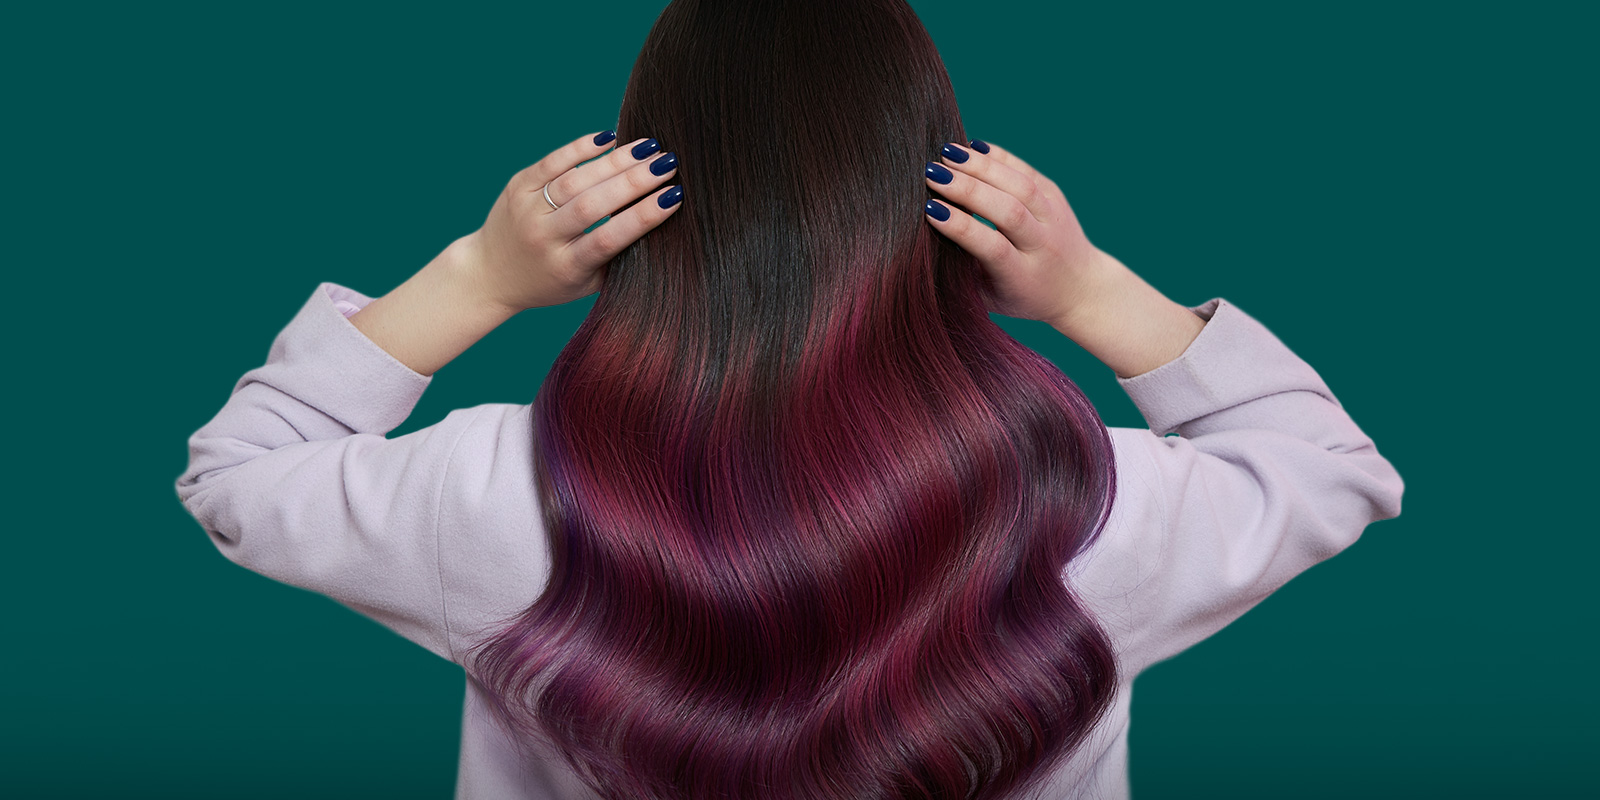 Ombre dyeing: the latest hair coloring trends and techniques with professional advice